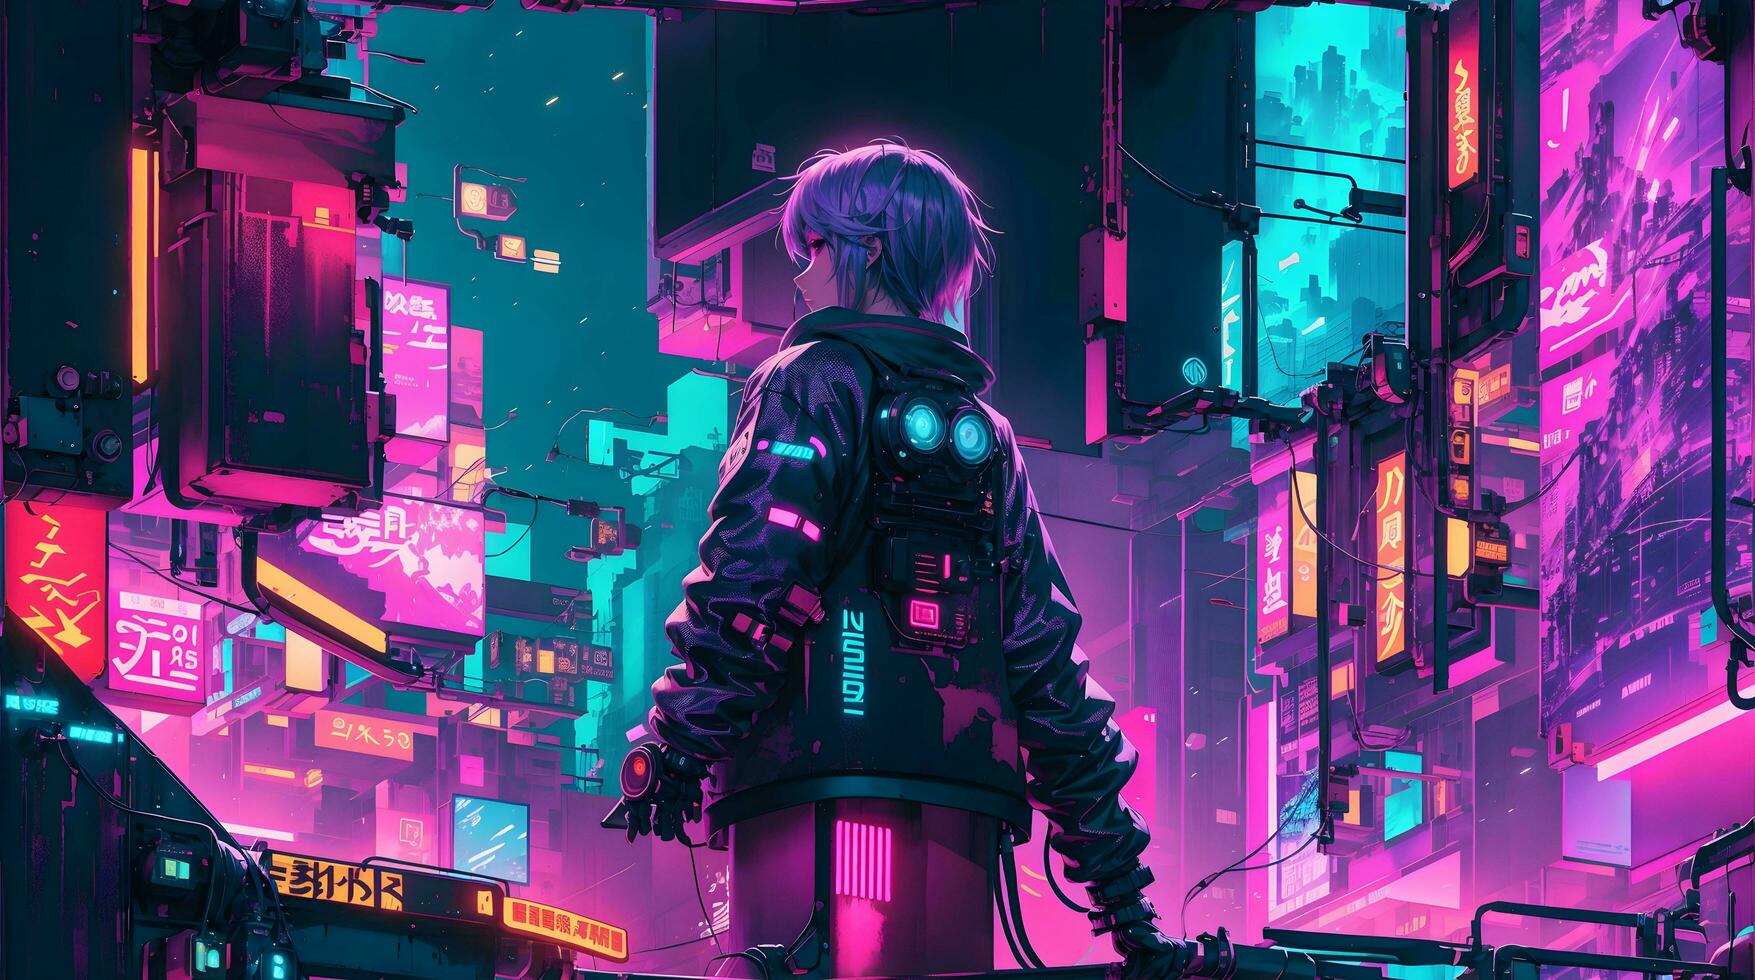 CyberPunk Background Images